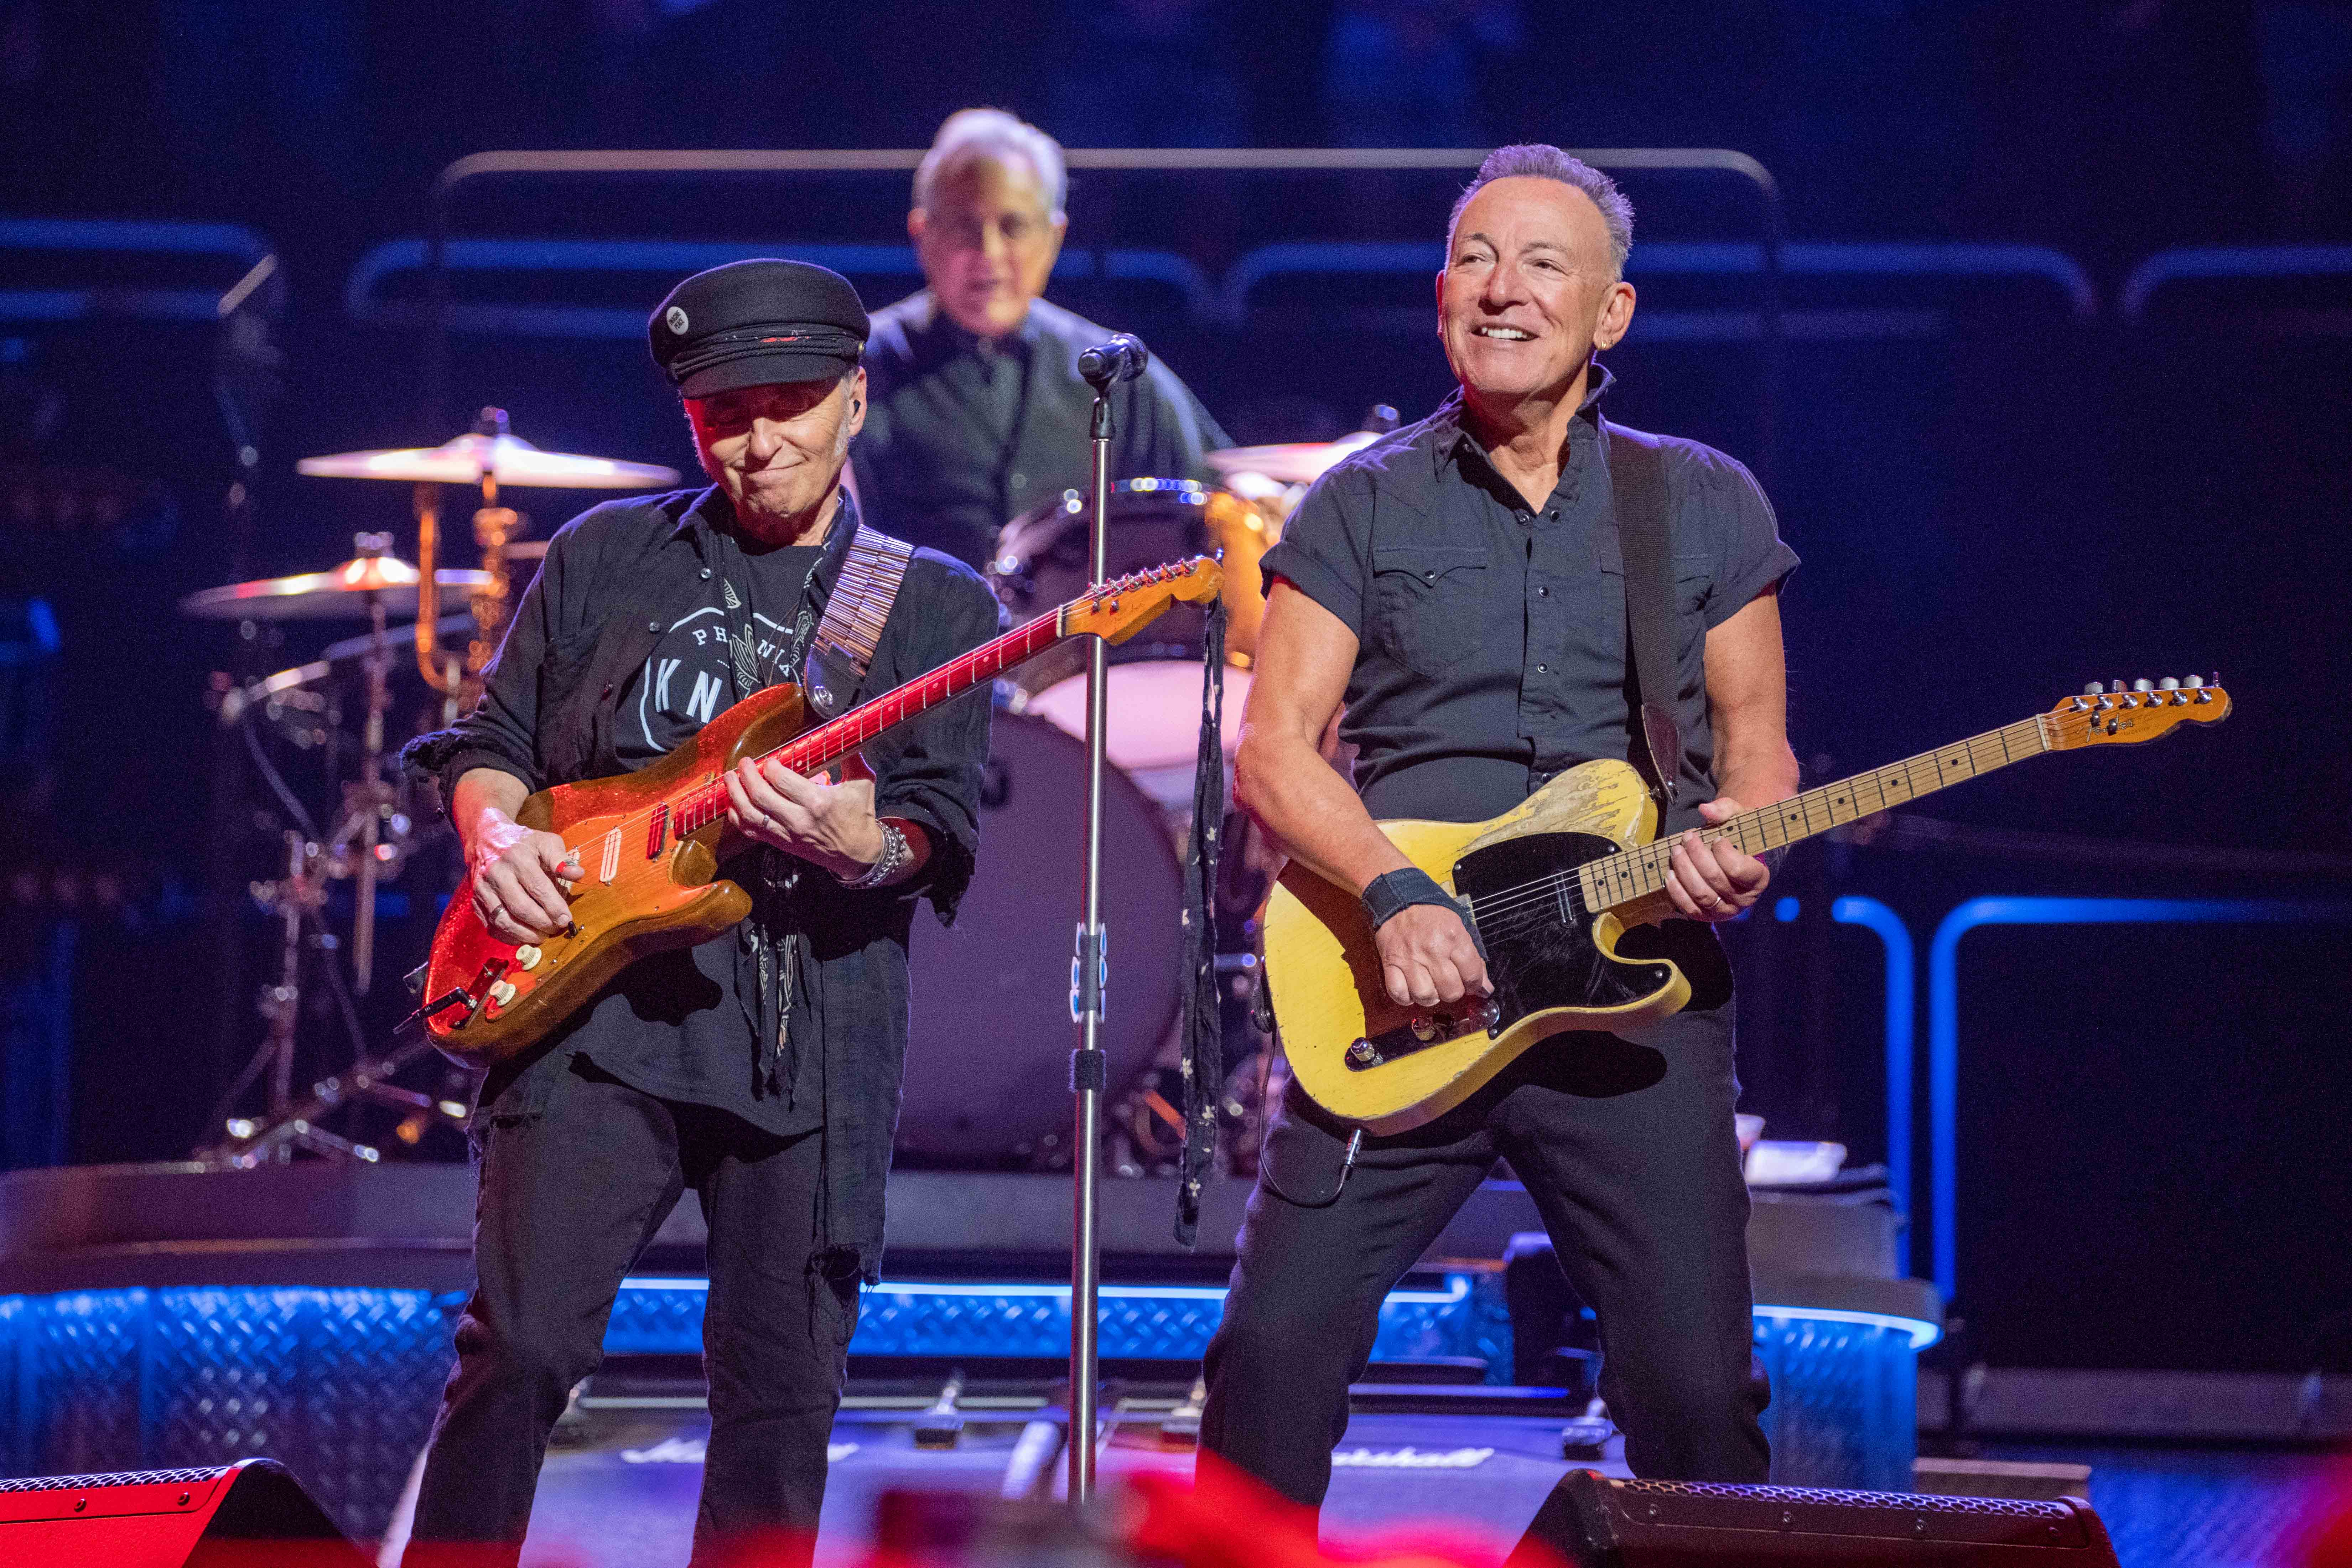 Bruce Springsteen & E Street Band at Amway Center, Orlando, FL on February 5, 2023.